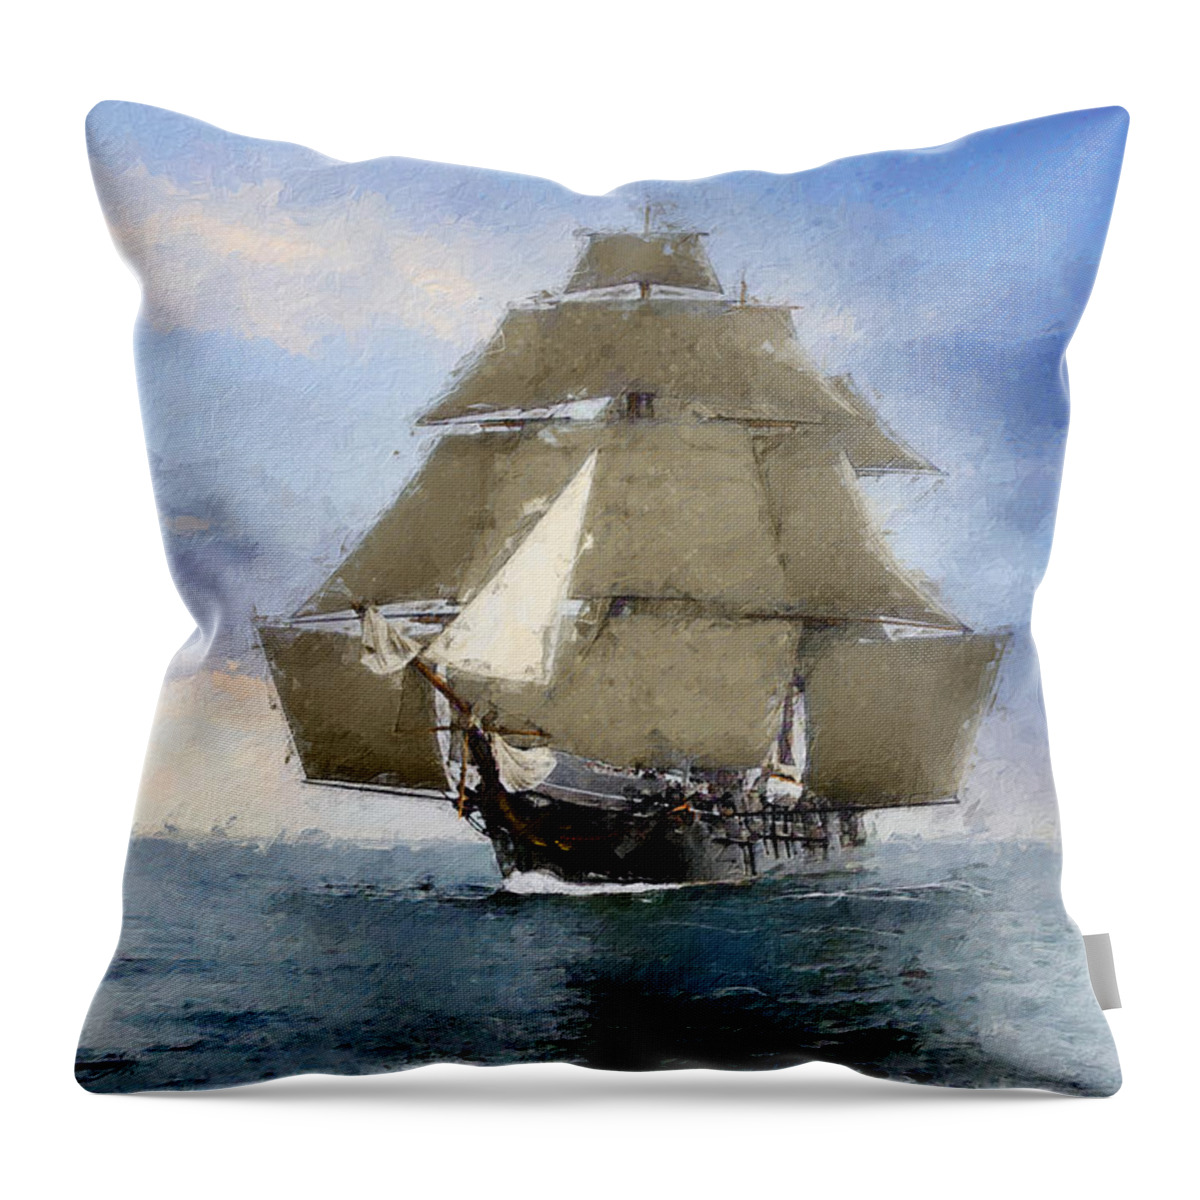 Sailing Ship Throw Pillow featuring the digital art Unfurled by Geir Rosset